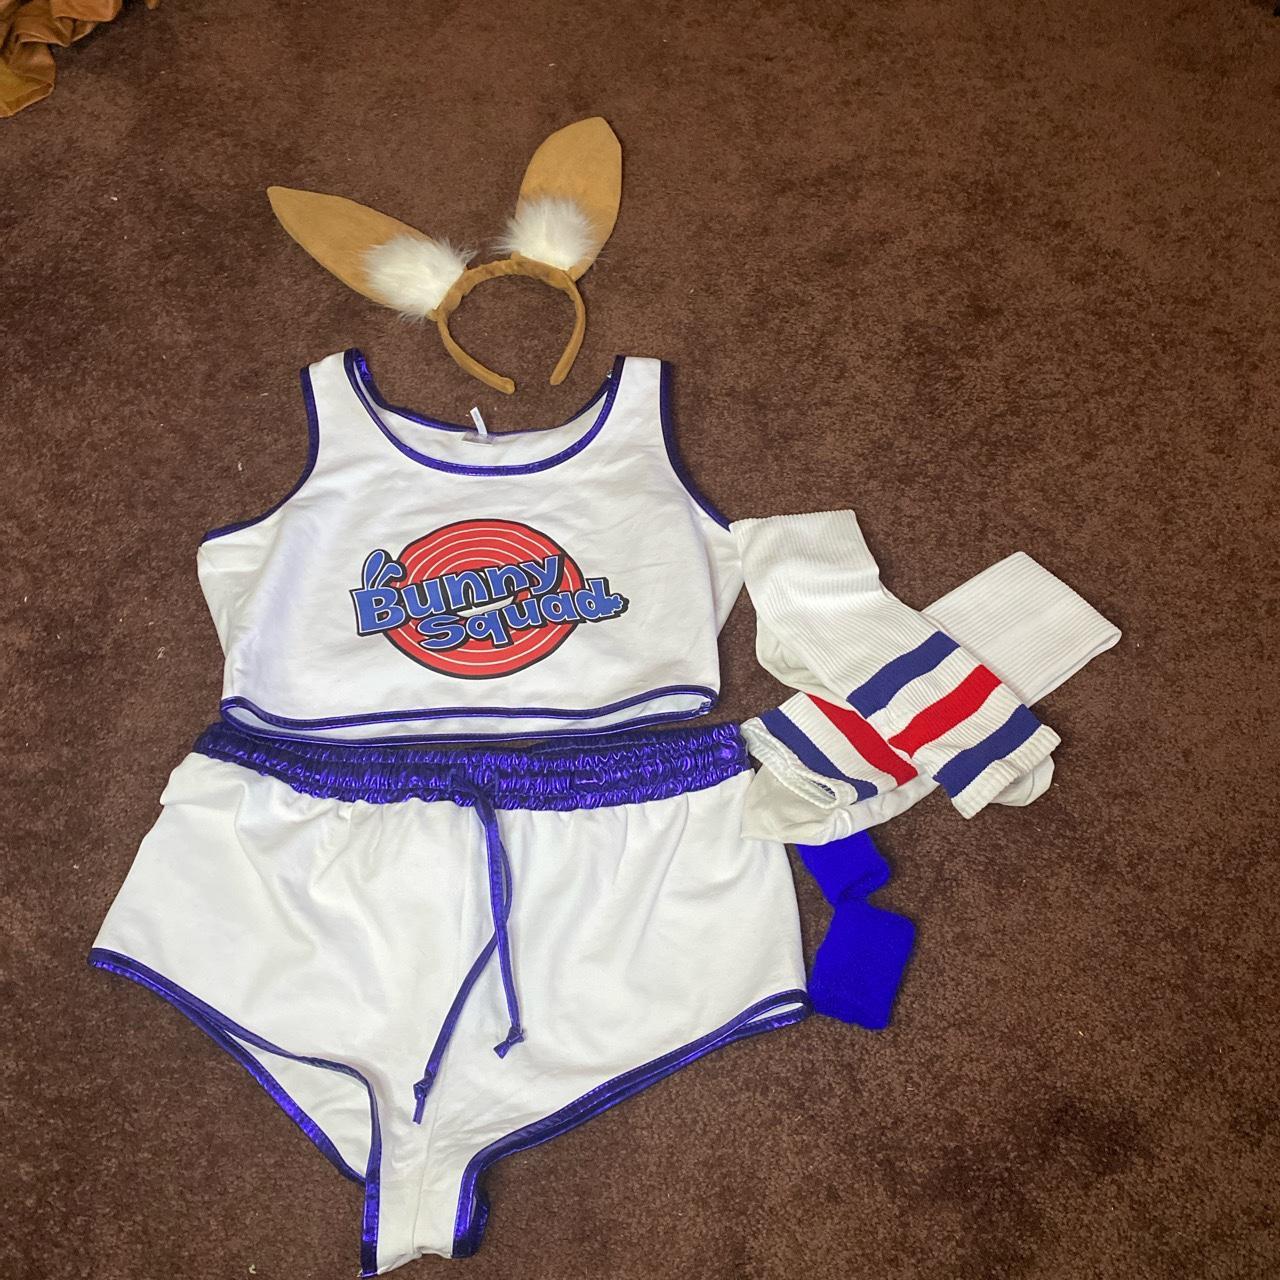 lola bunny costume size: L/XL wore once comes with... - Depop